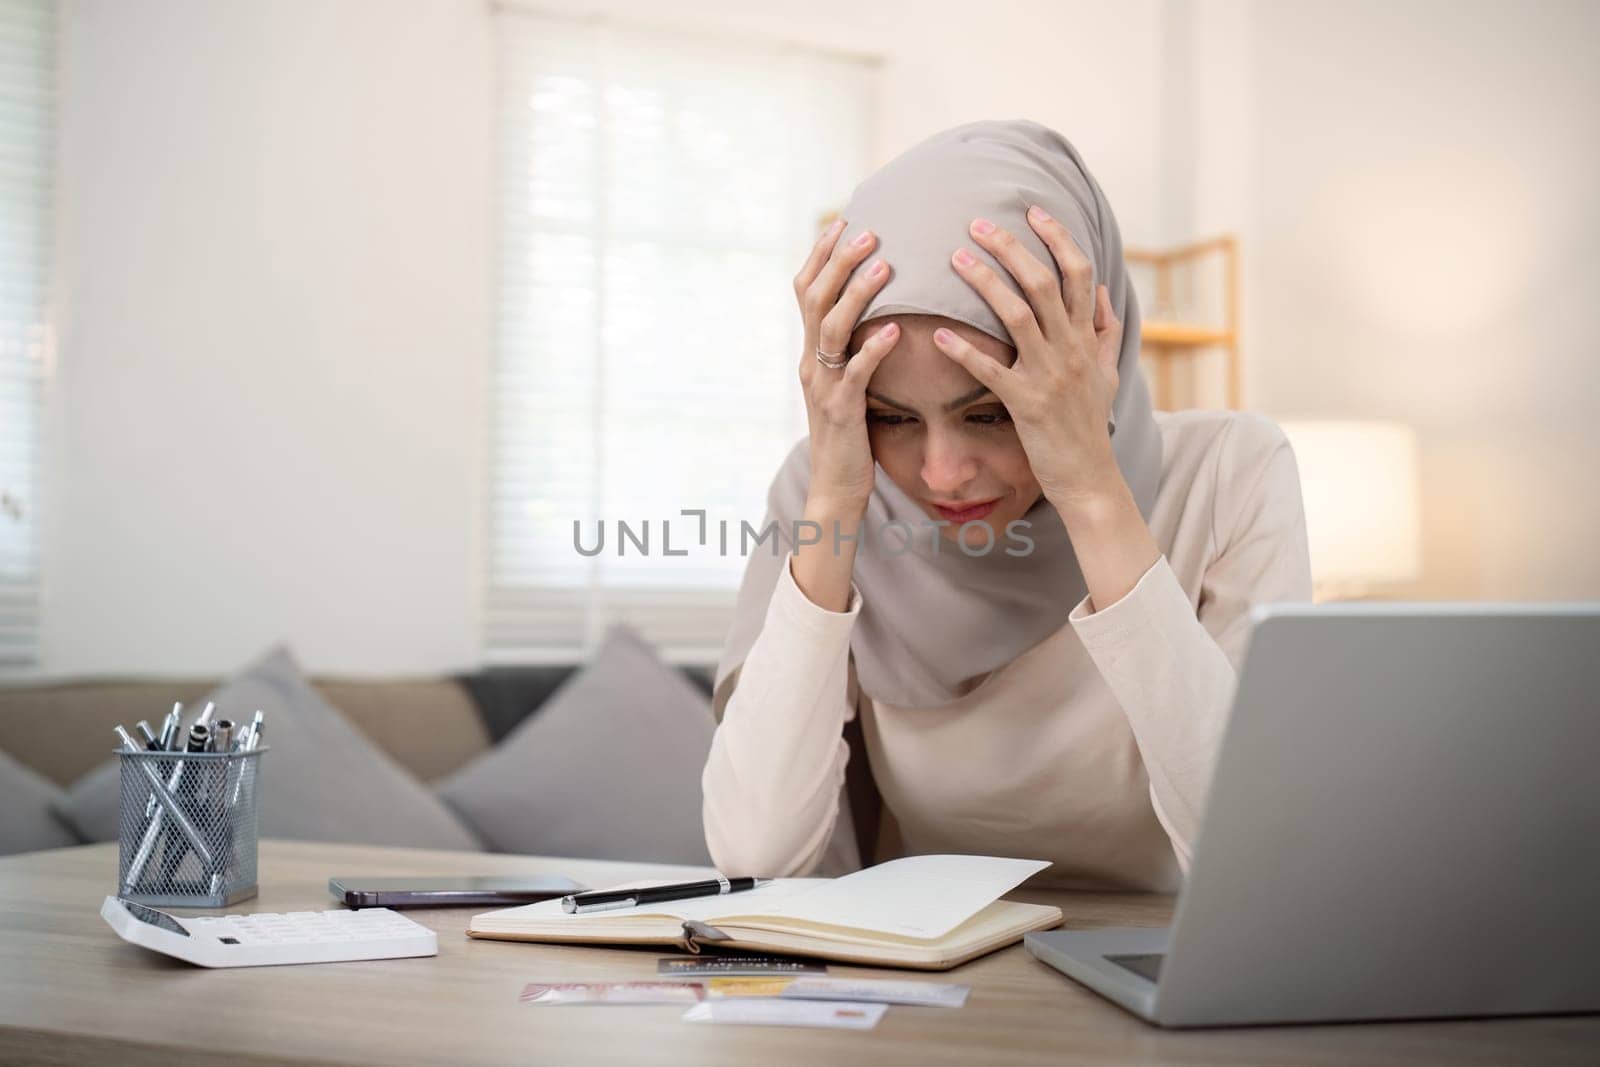 Muslim woman calculate using calculator and invoice bill document with stress young muslim woman covering head she is having financial problem by nateemee